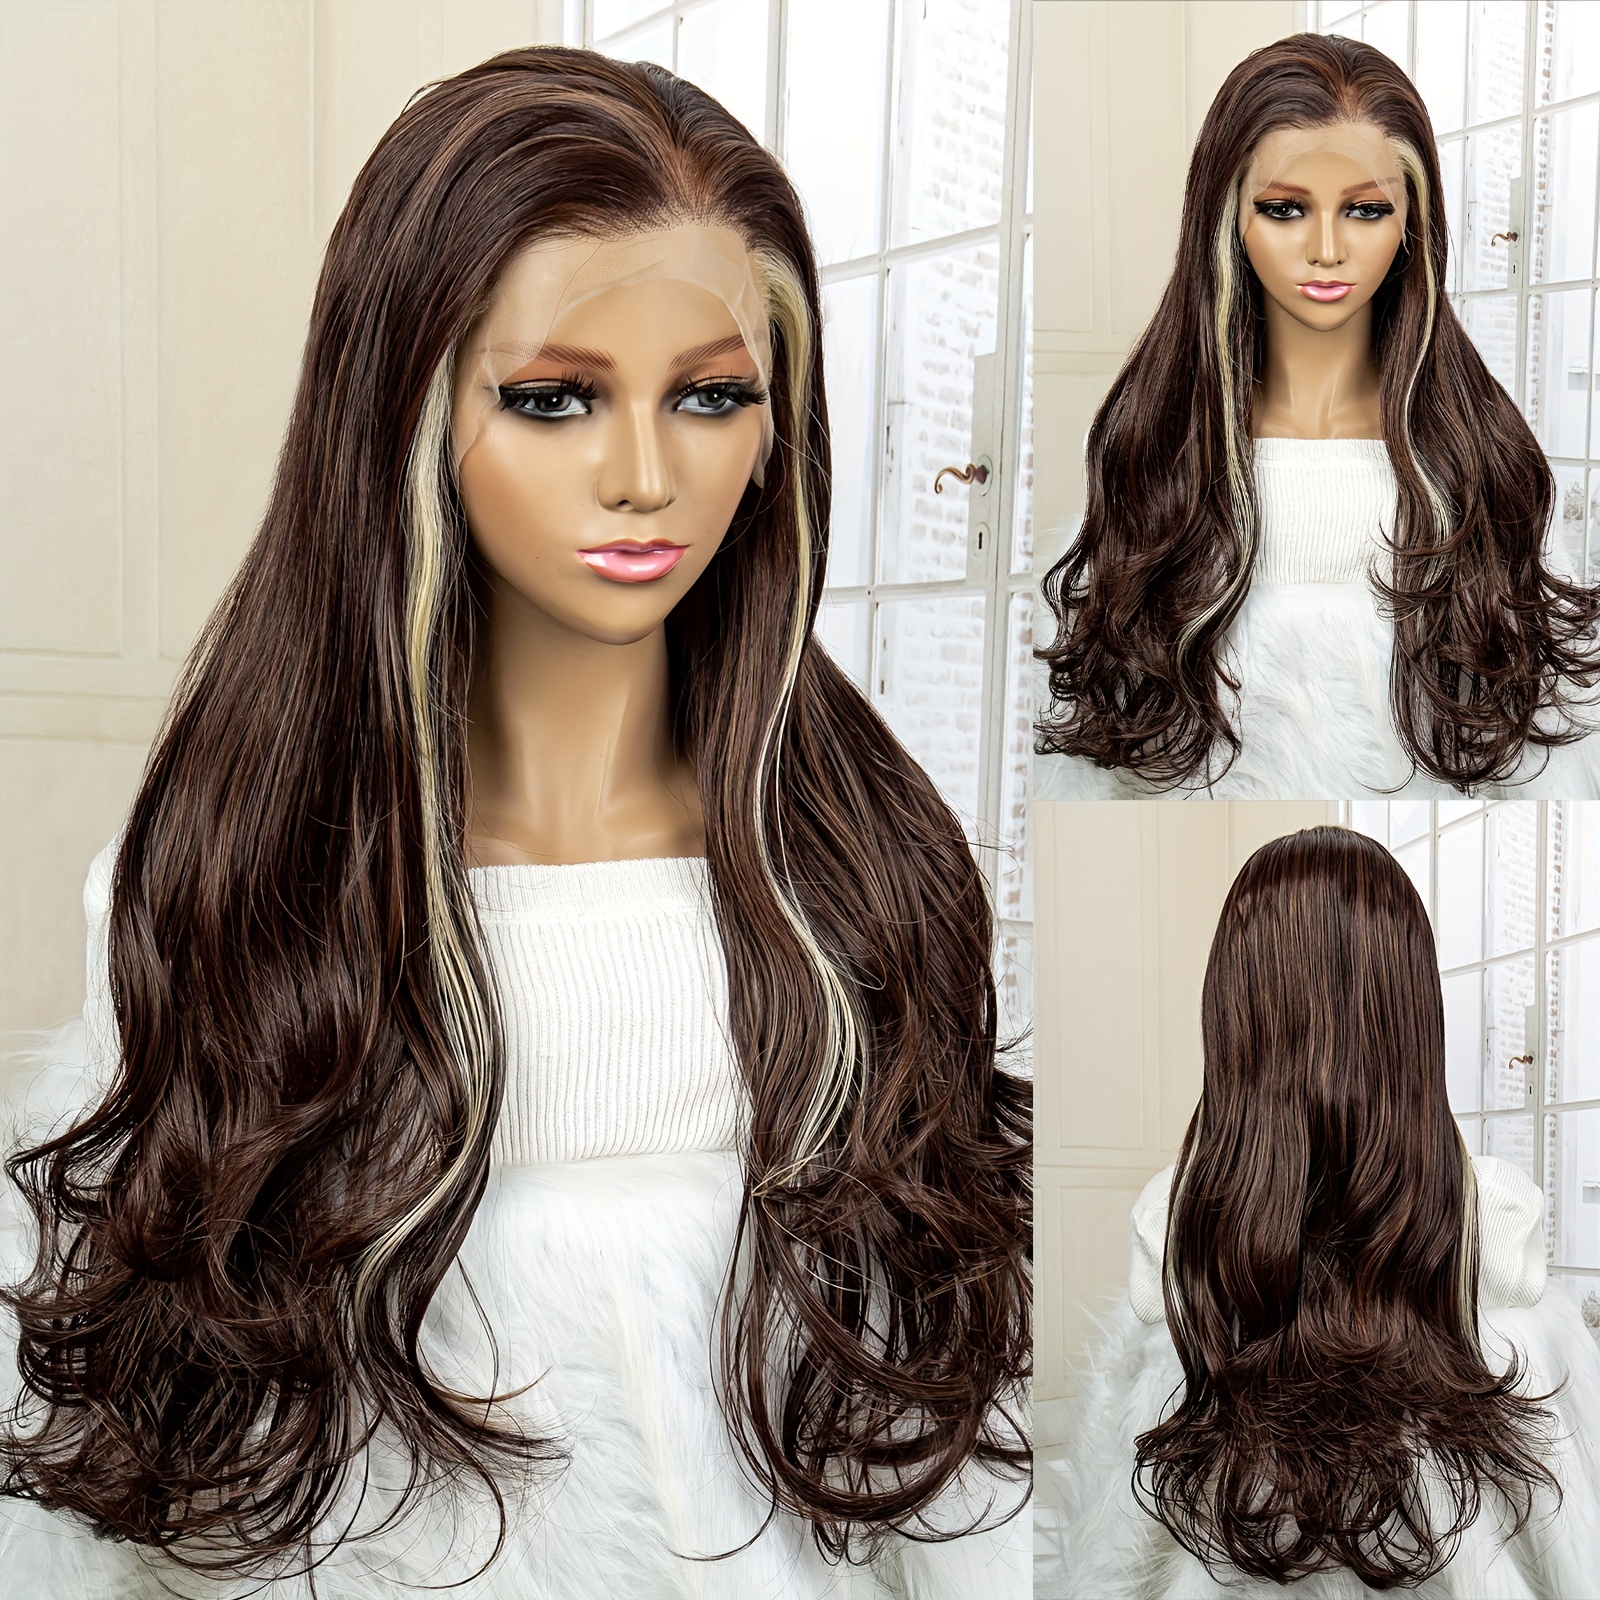 Body Wave Hair Wigs 13*4 Lace Front Hair Wigs For Women Synthetic Lace  Front Wavy Hair Wigs 28-32 Inch